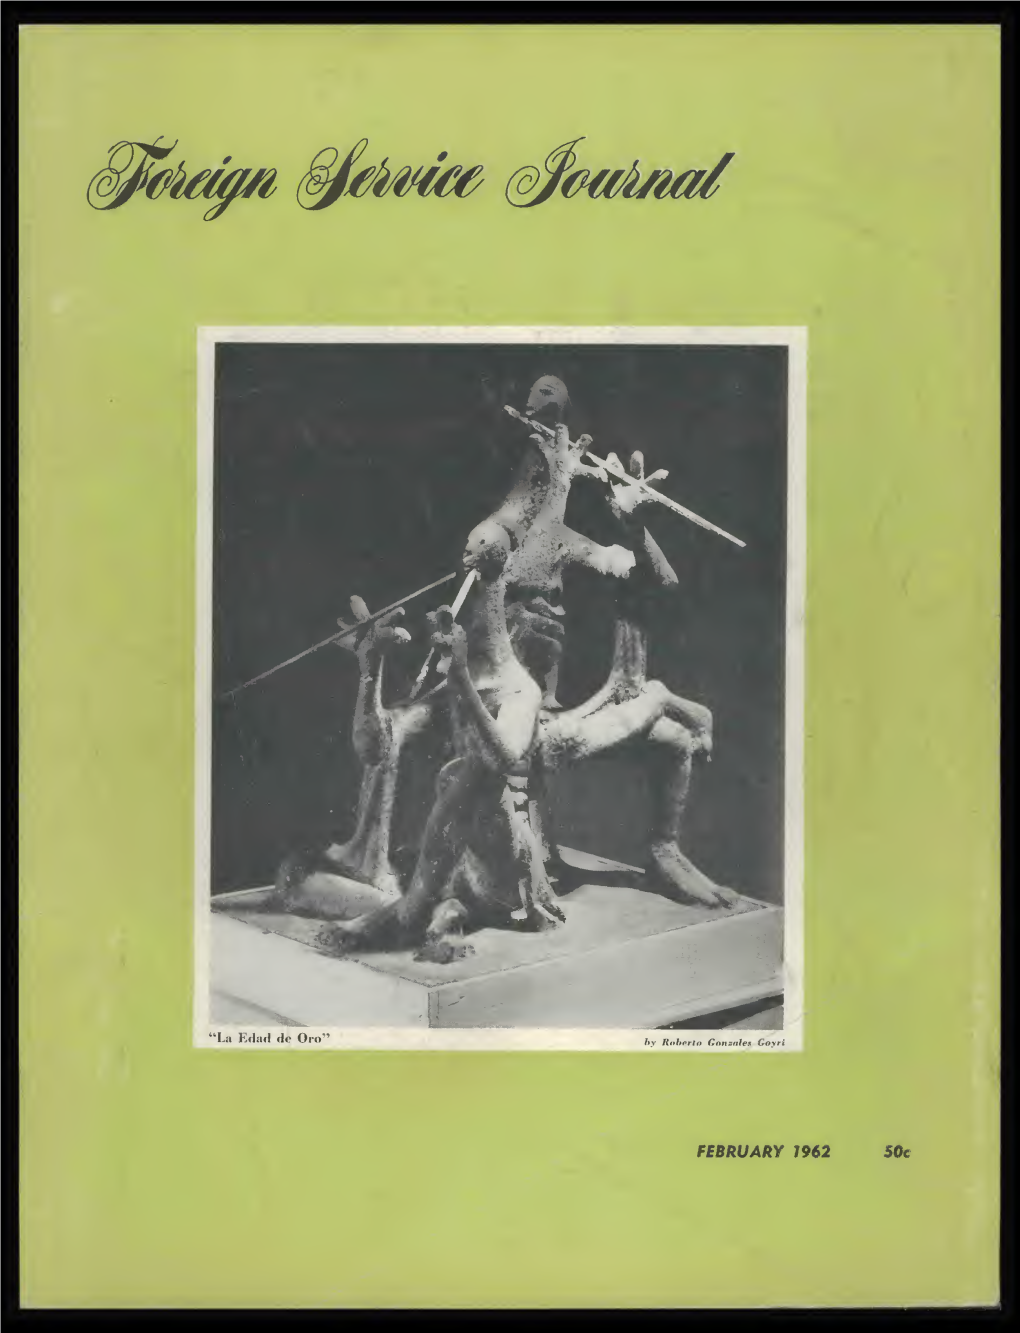 The Foreign Service Journal, February 1962